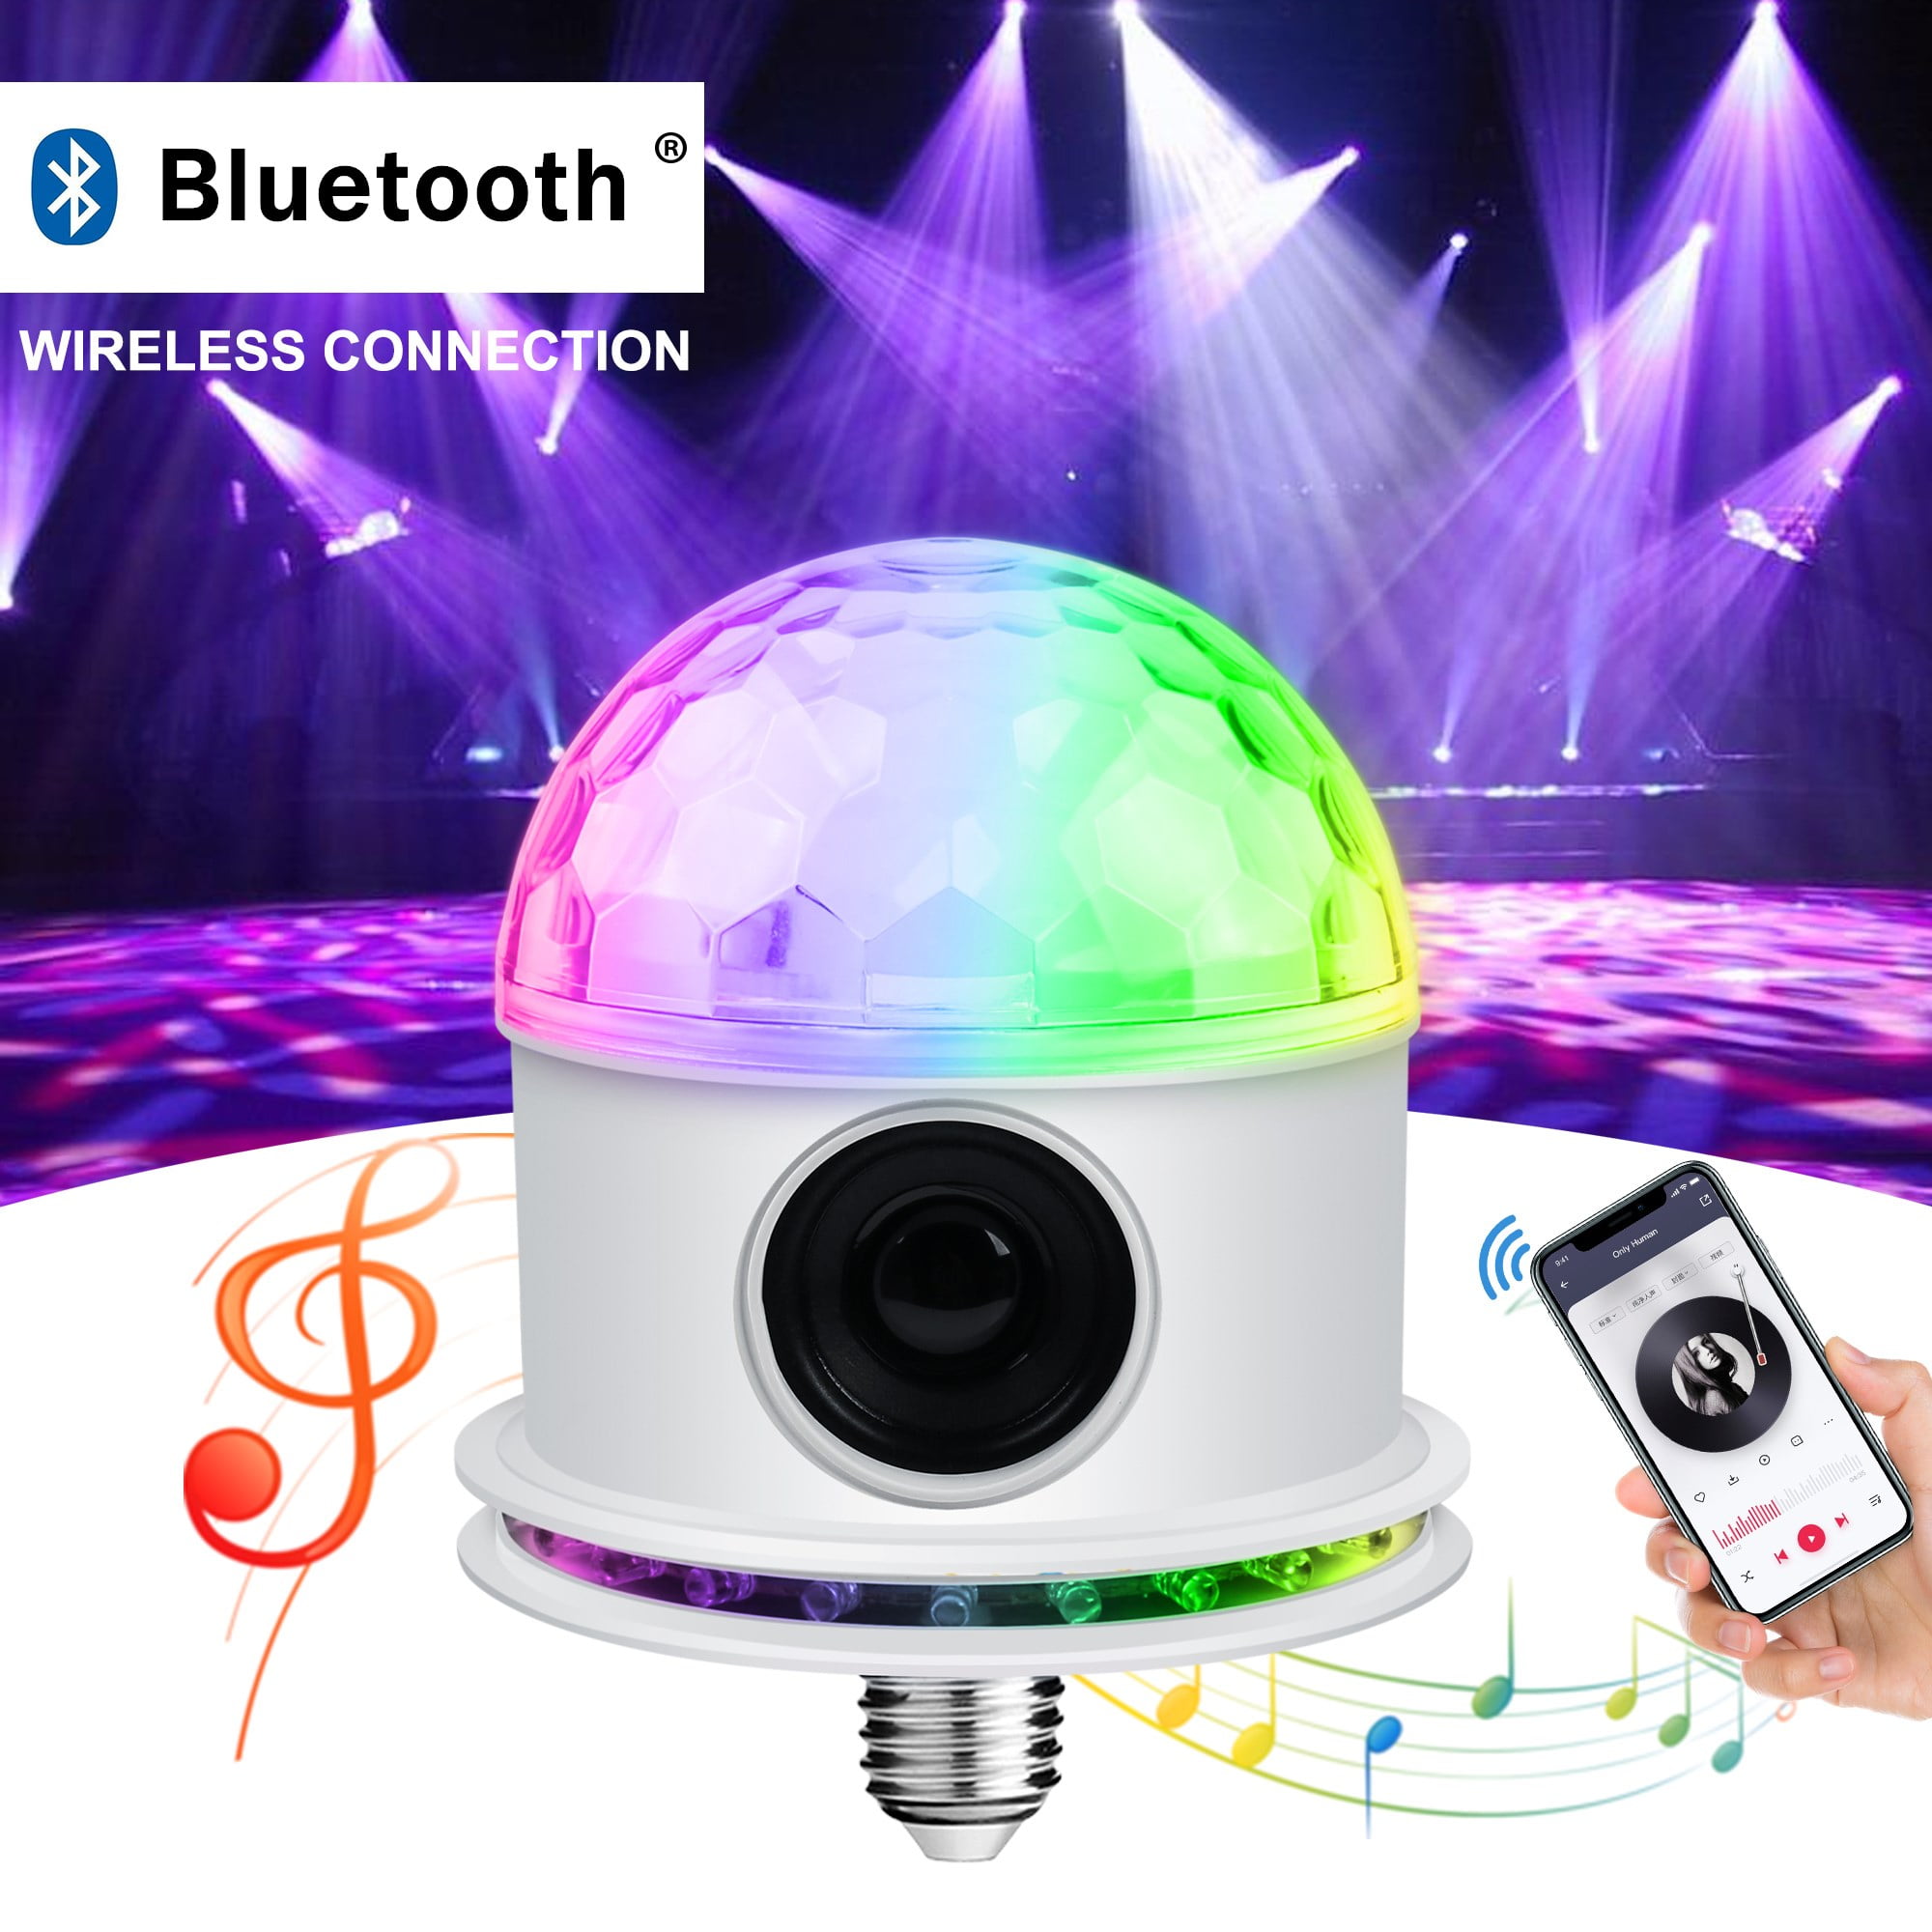 12V Pink, Blue, Colorful ADKINC Bluetooth Motorcycle Stereo Speakers Super Waterproof Sound Bars ATV Helmet Bluetooth Music with Colorful Lights